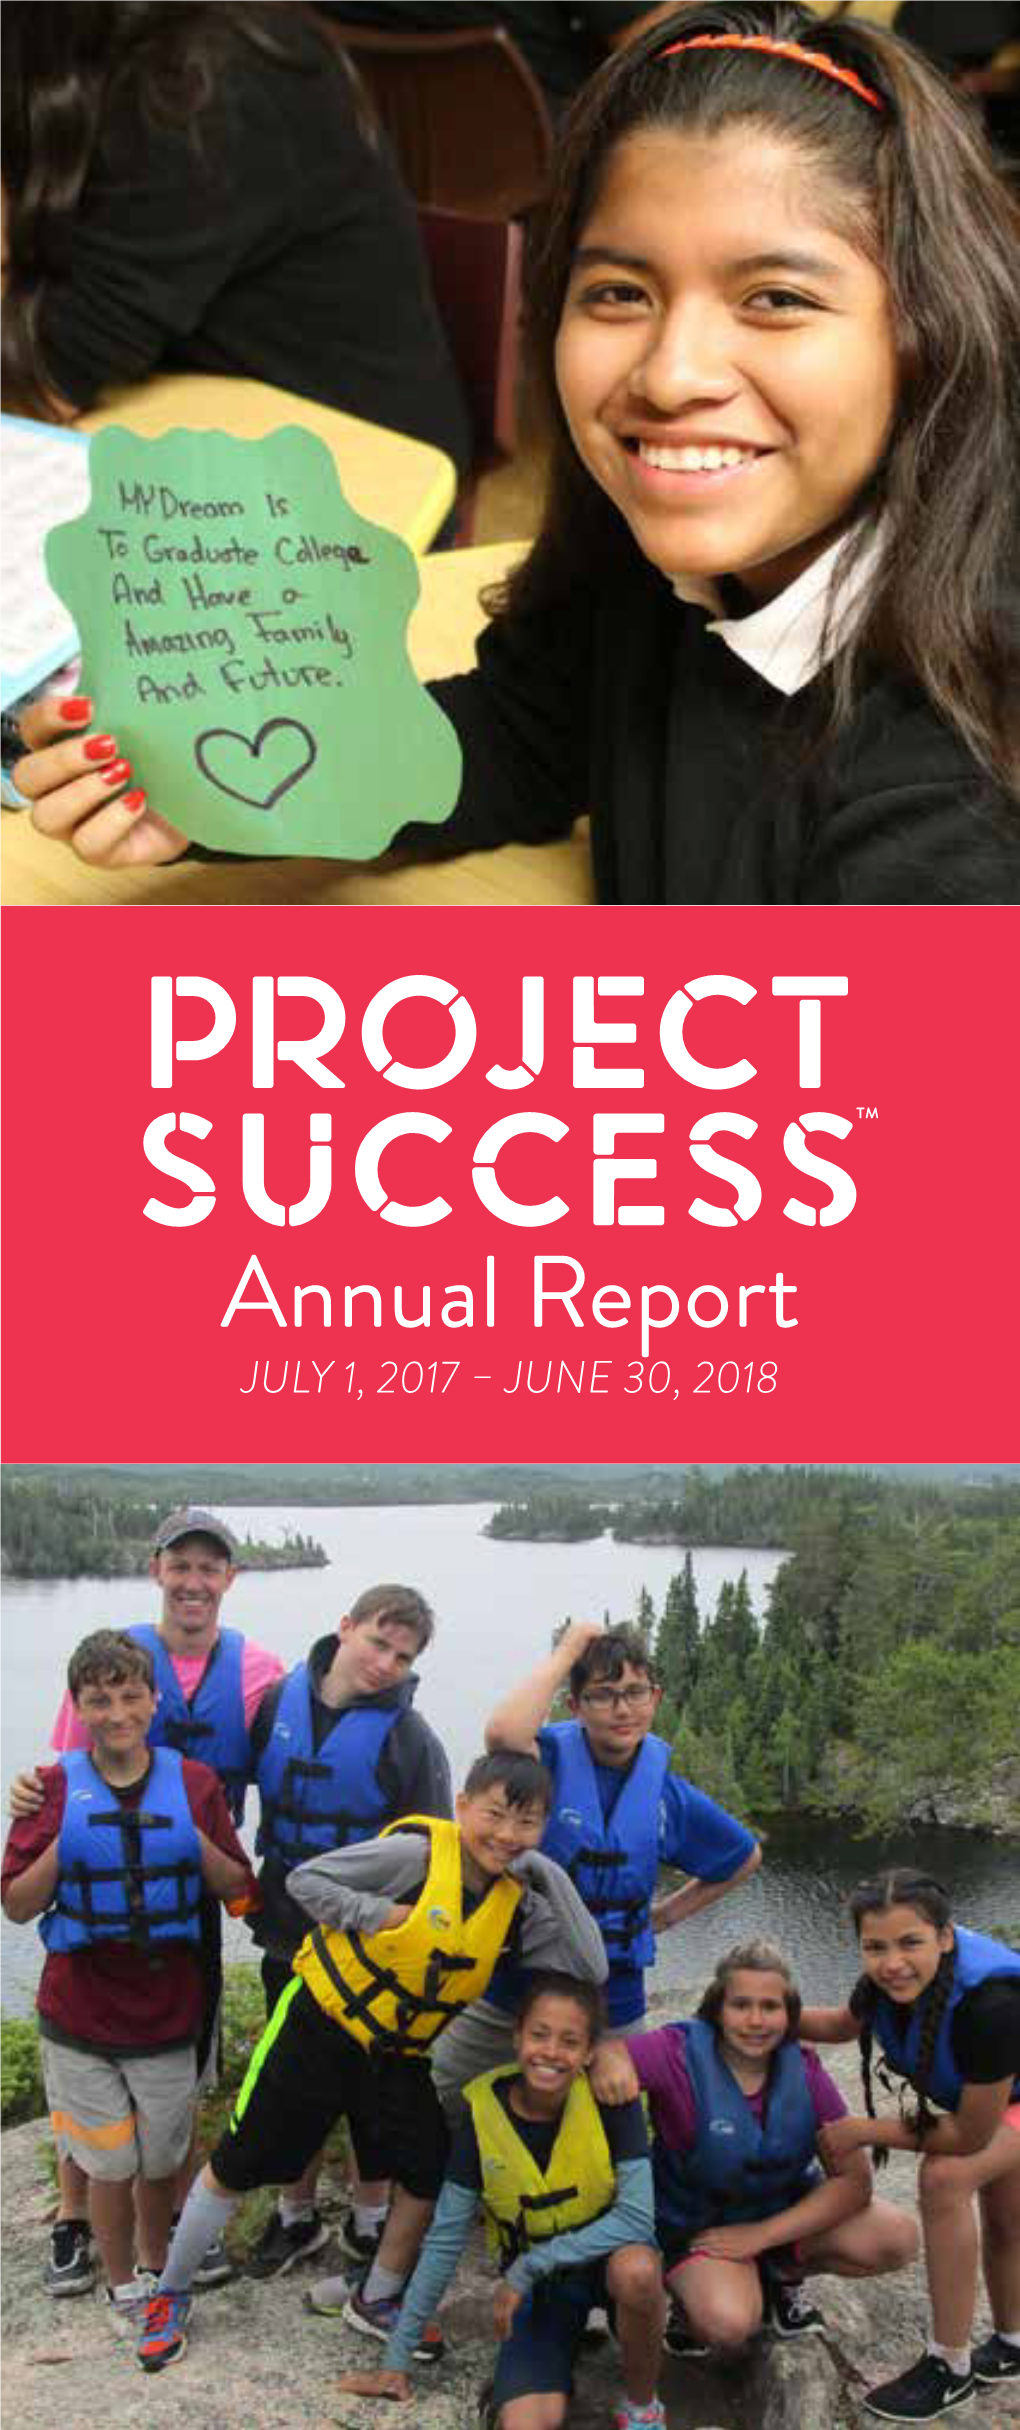 Annual Report JULY 1, 2017 – JUNE 30, 2018 Adrienne Diercks, Founder and Jody Rodrigues, Executive Director Board Chair